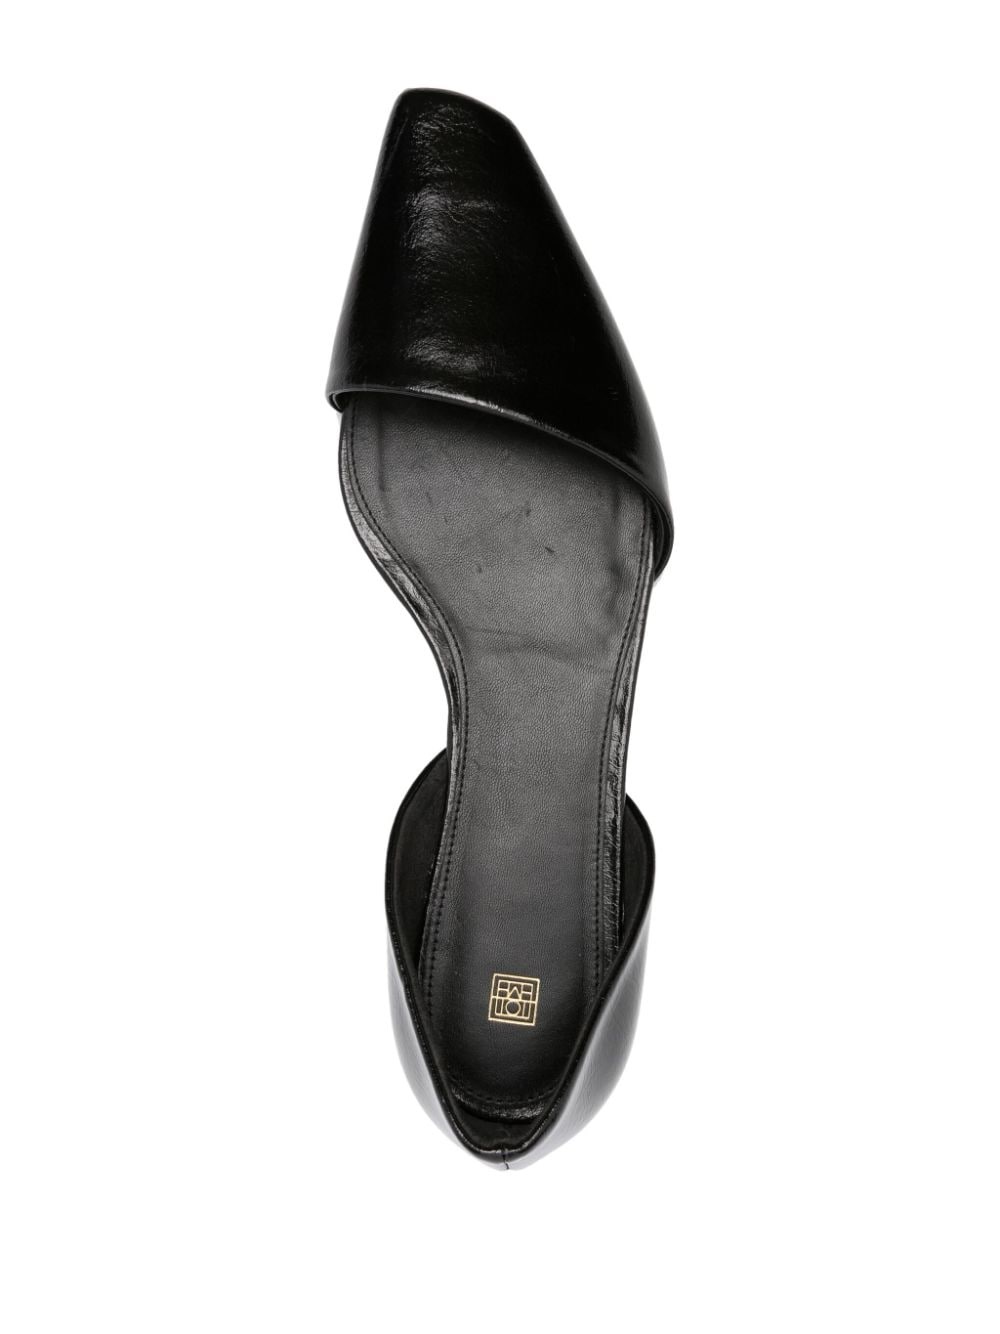 The Asymmetric d'Orsay leather ballerina shoes - 4